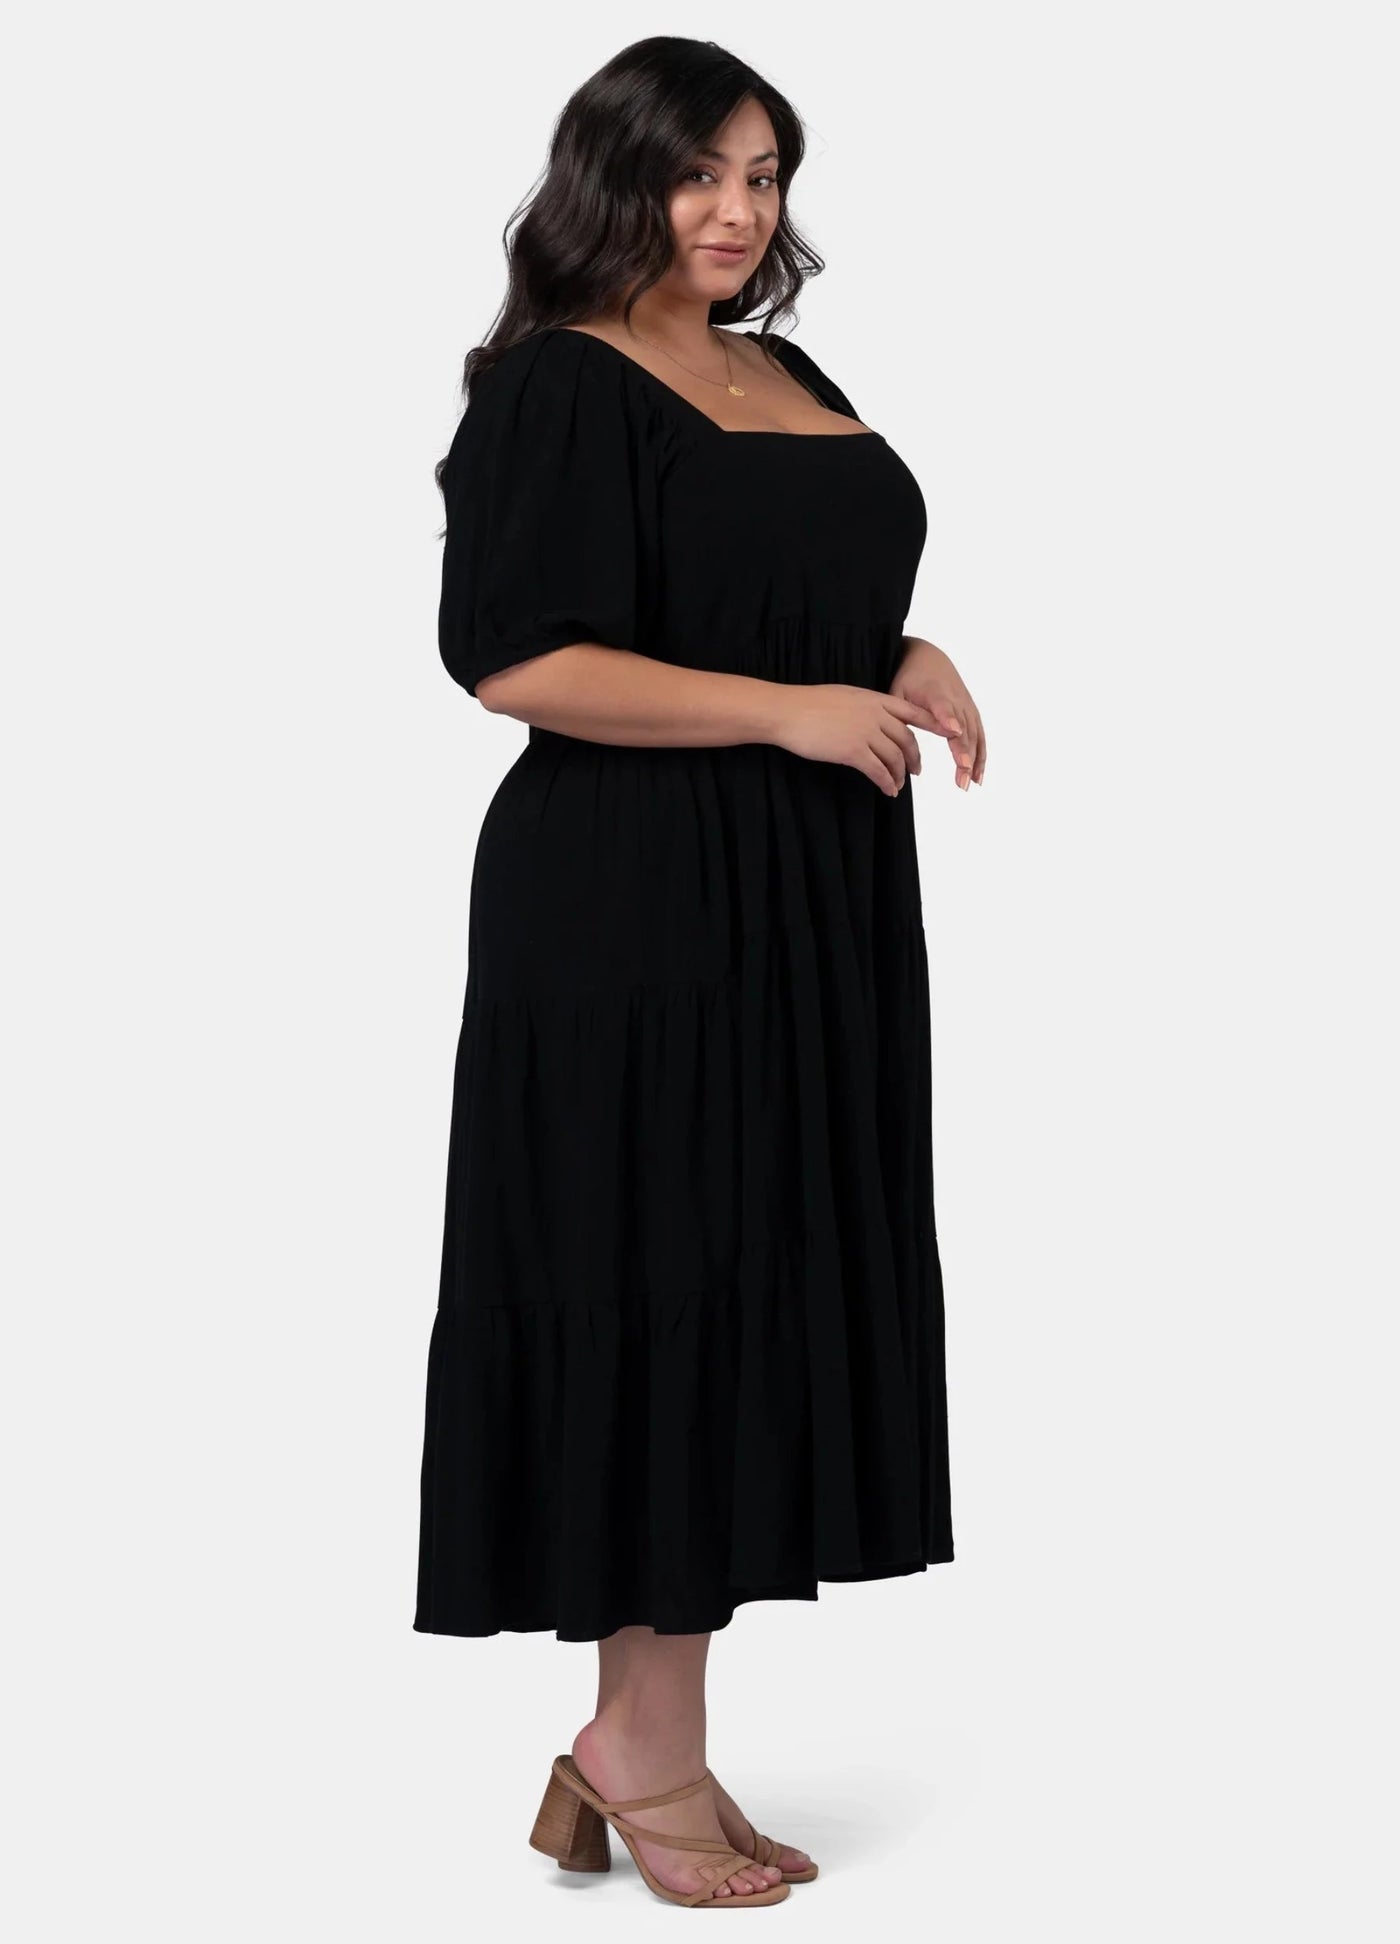 Black isadora dress with puff sleeves and tie at the back